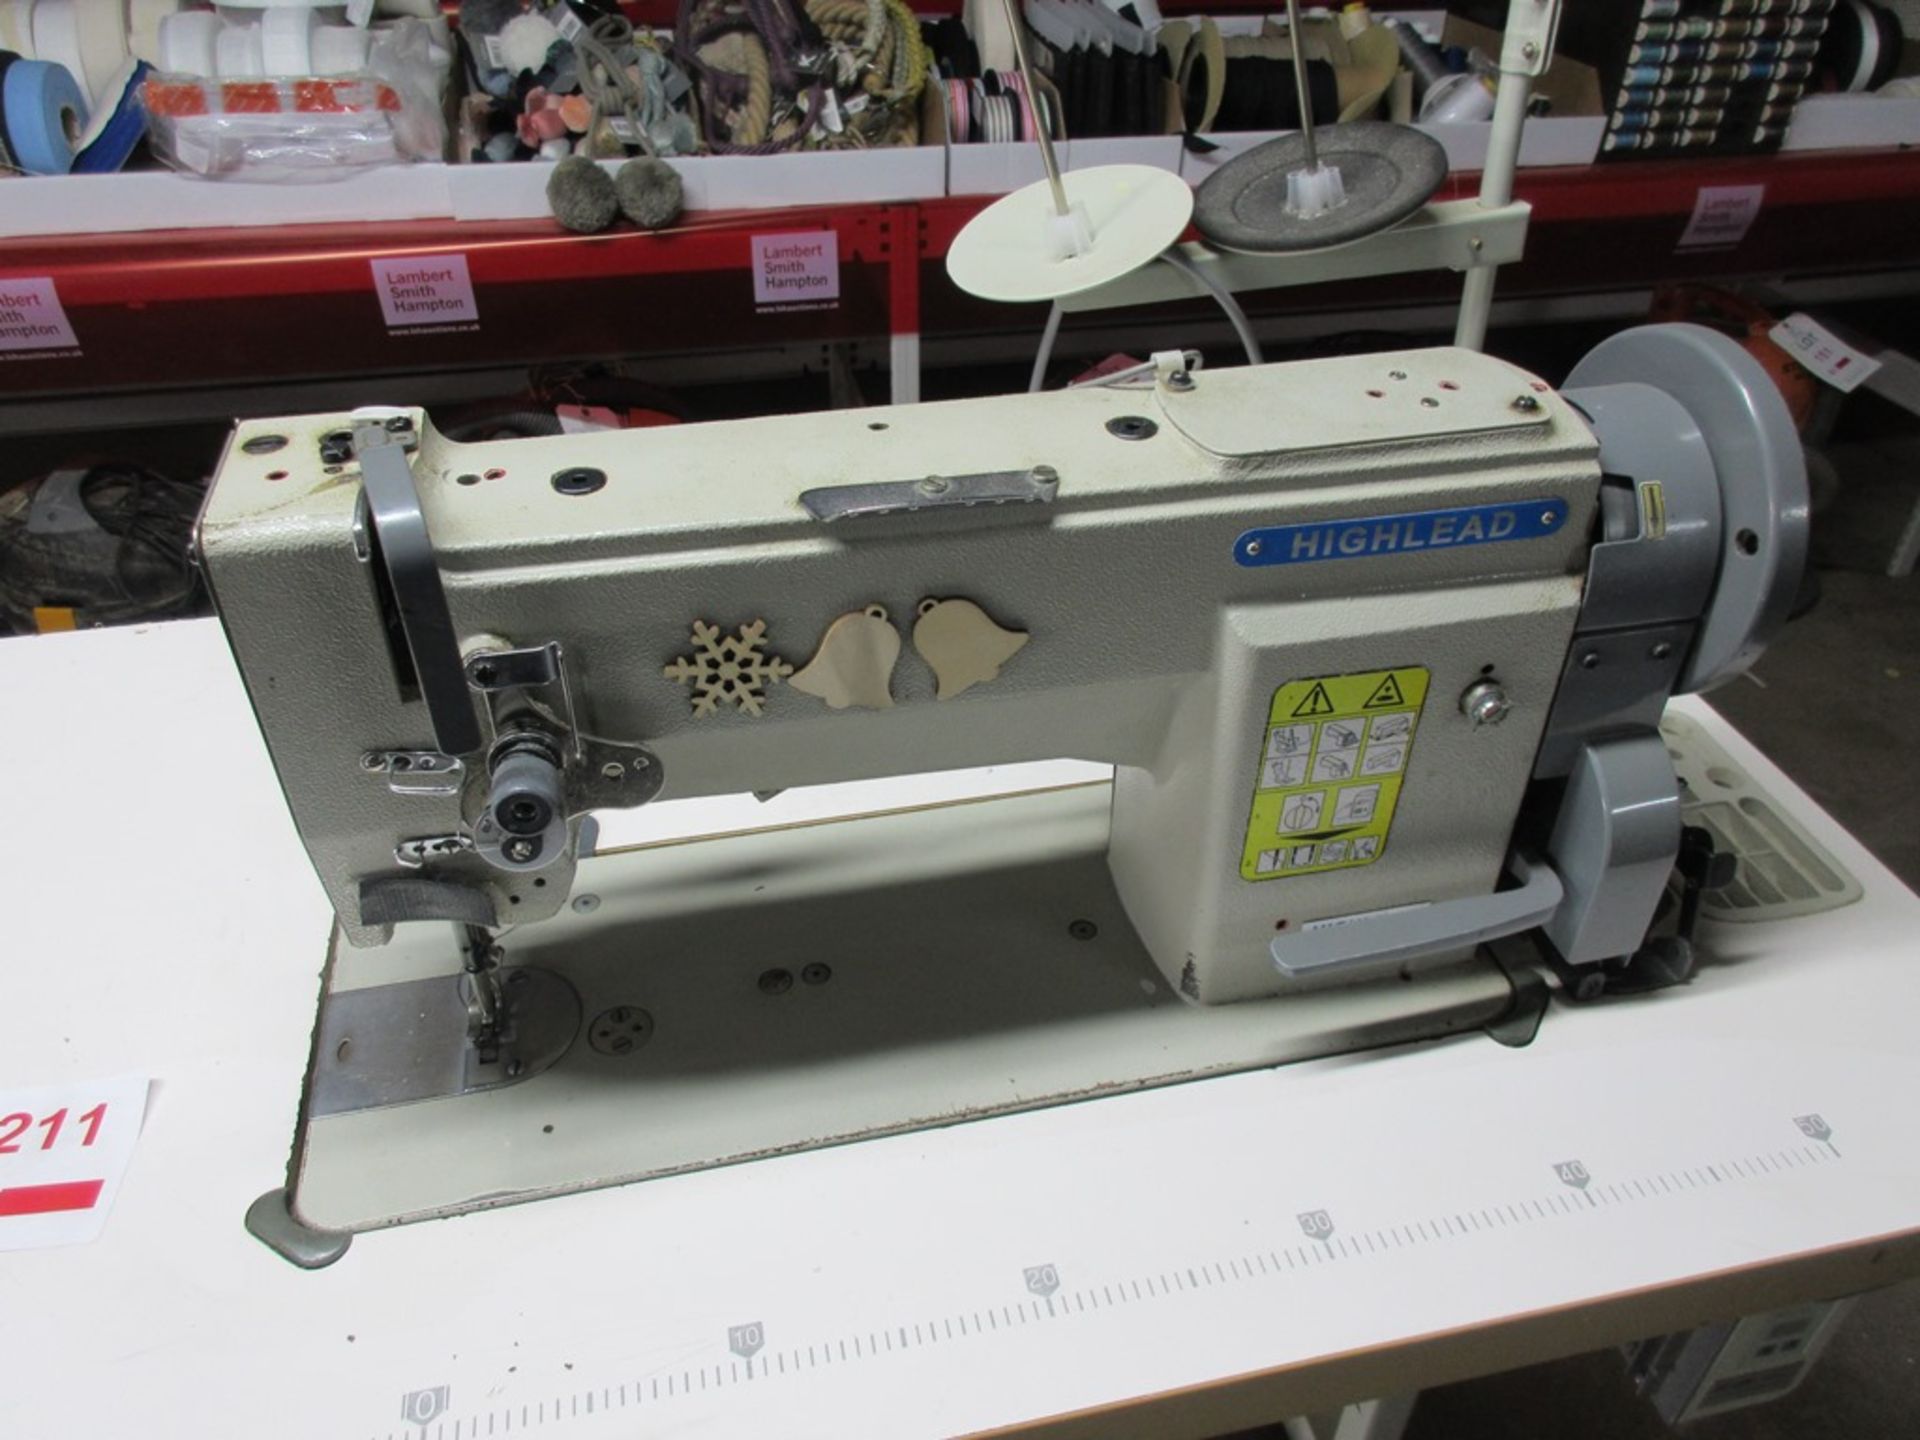 Highlead GC0618-1-SC flat bed sewing machine, 240v